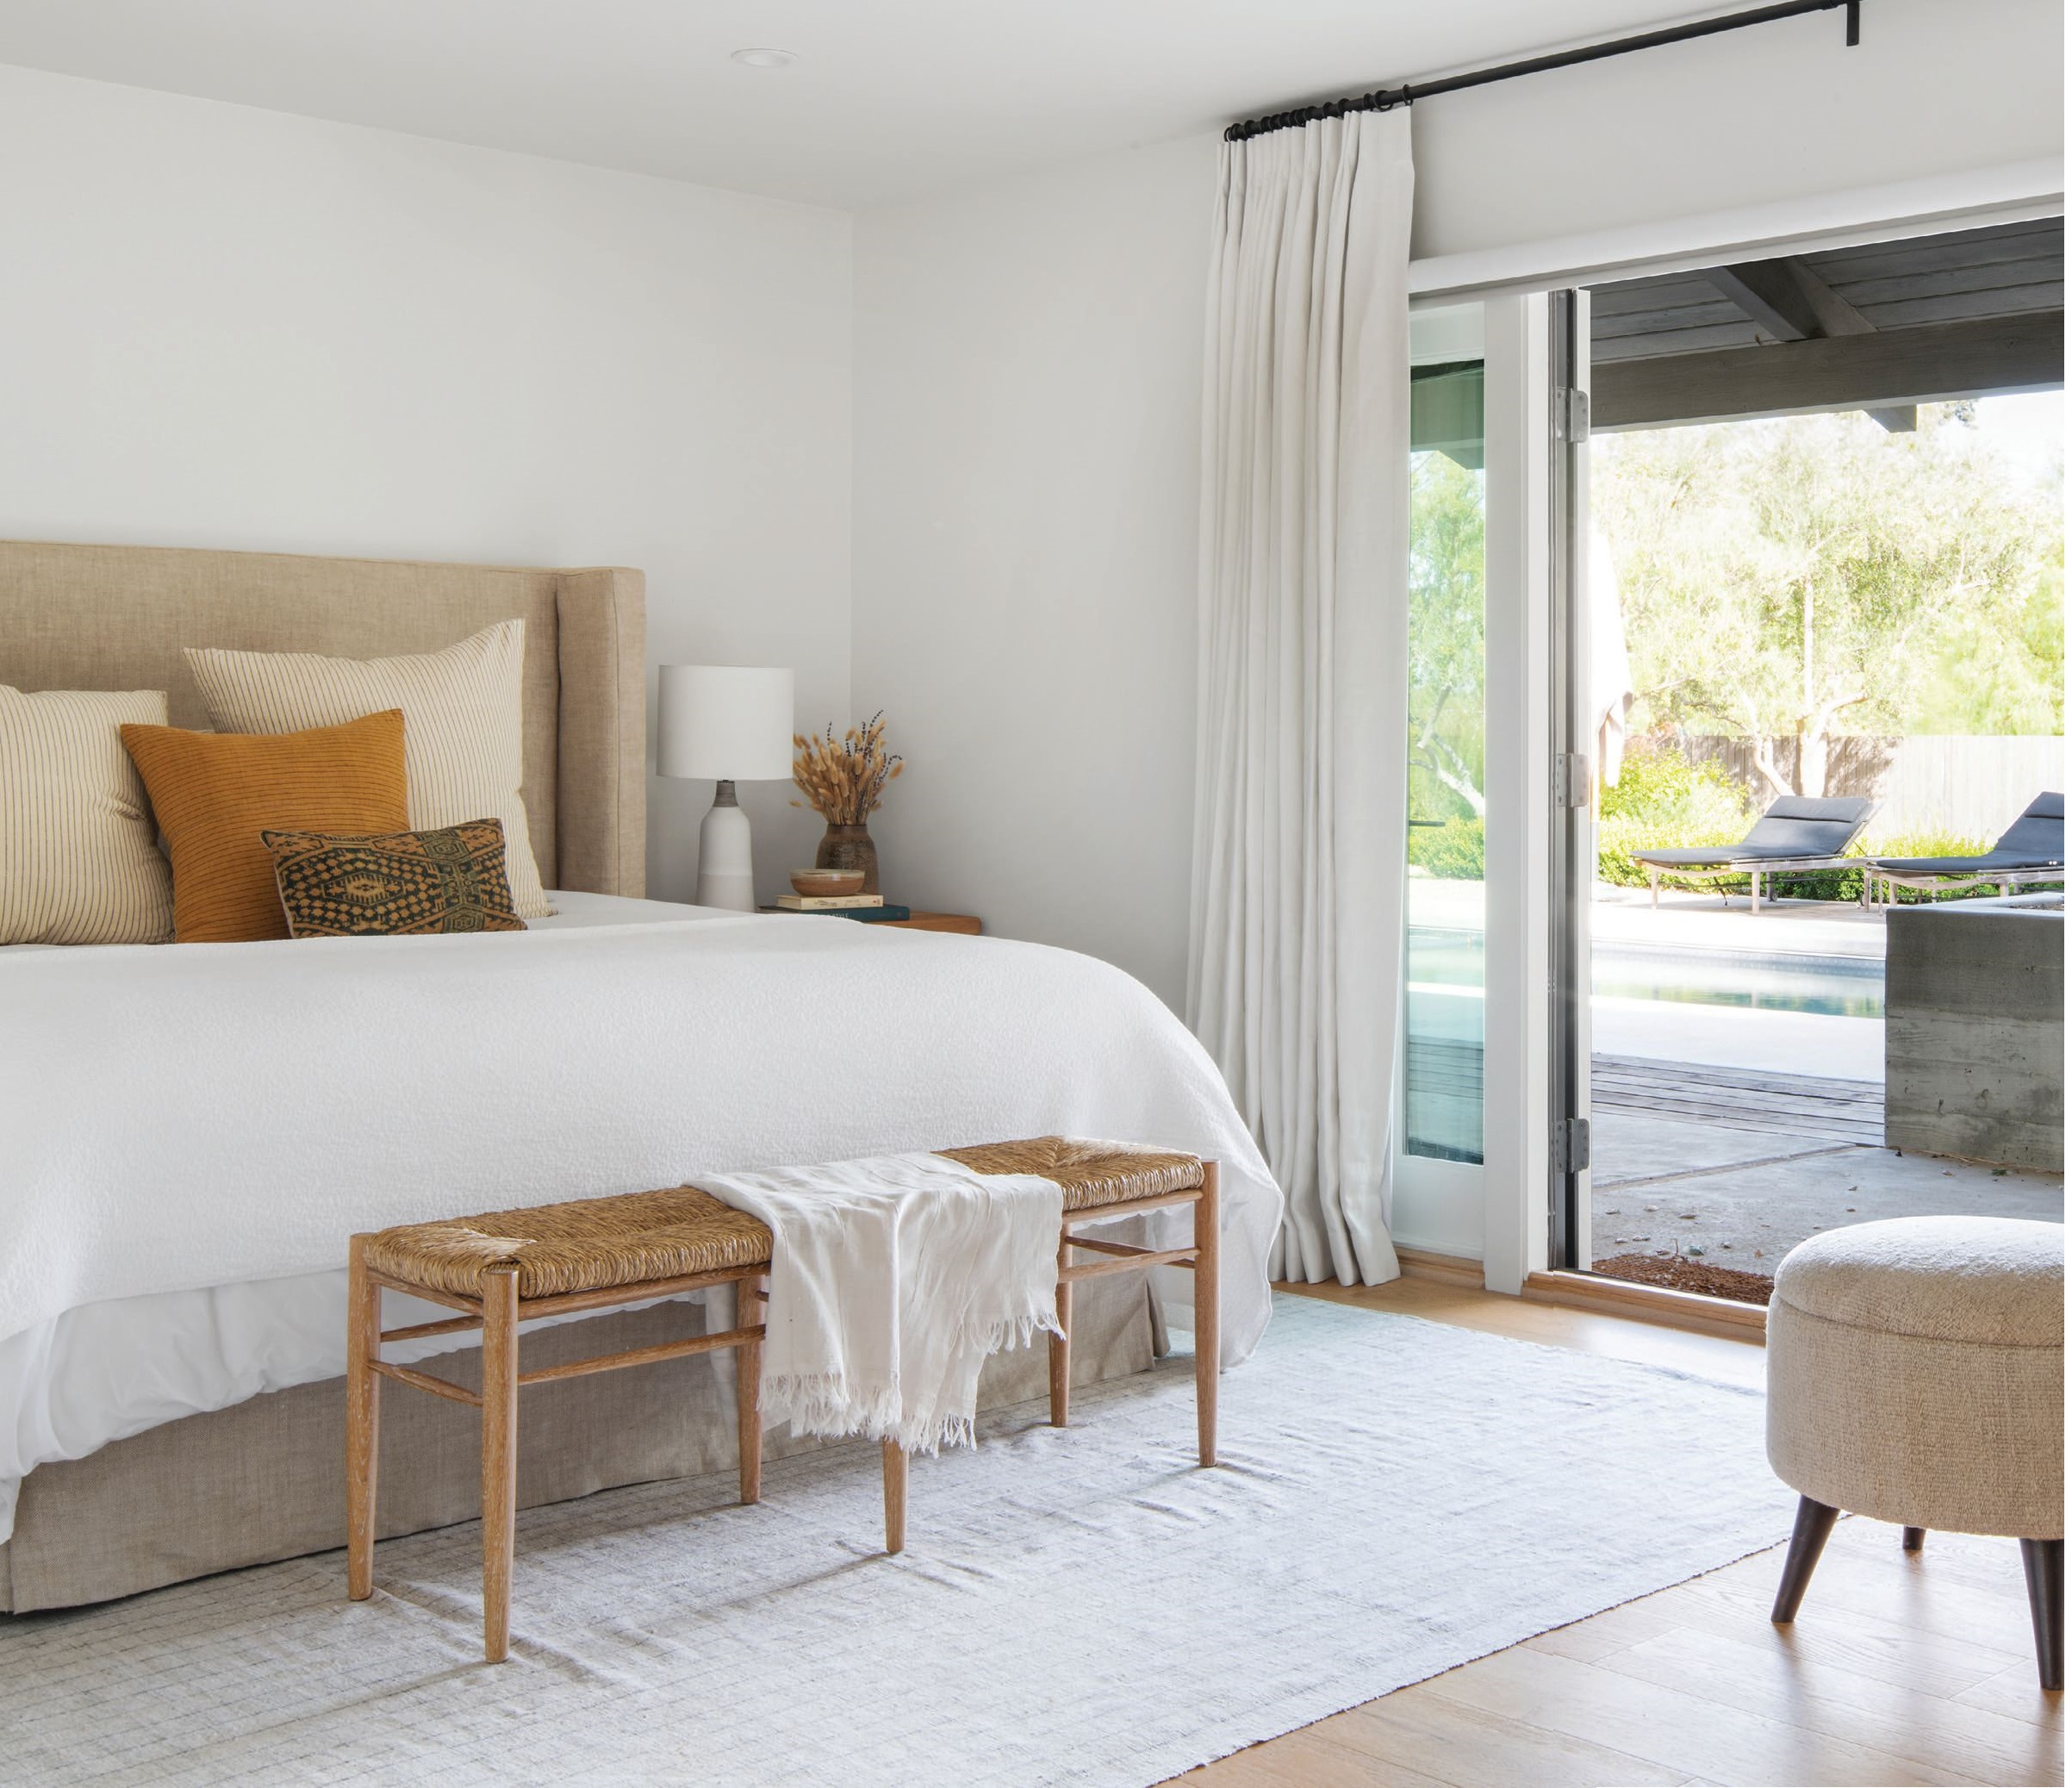 Located just off the pool, a guest bedroom is accented with a bench from Made
Goods, nightstands by Nickey Kehoe and bedding by Parachute Home. The pillows and rug are vintage. PHOTOGRAPHED BY GAVIN CATER